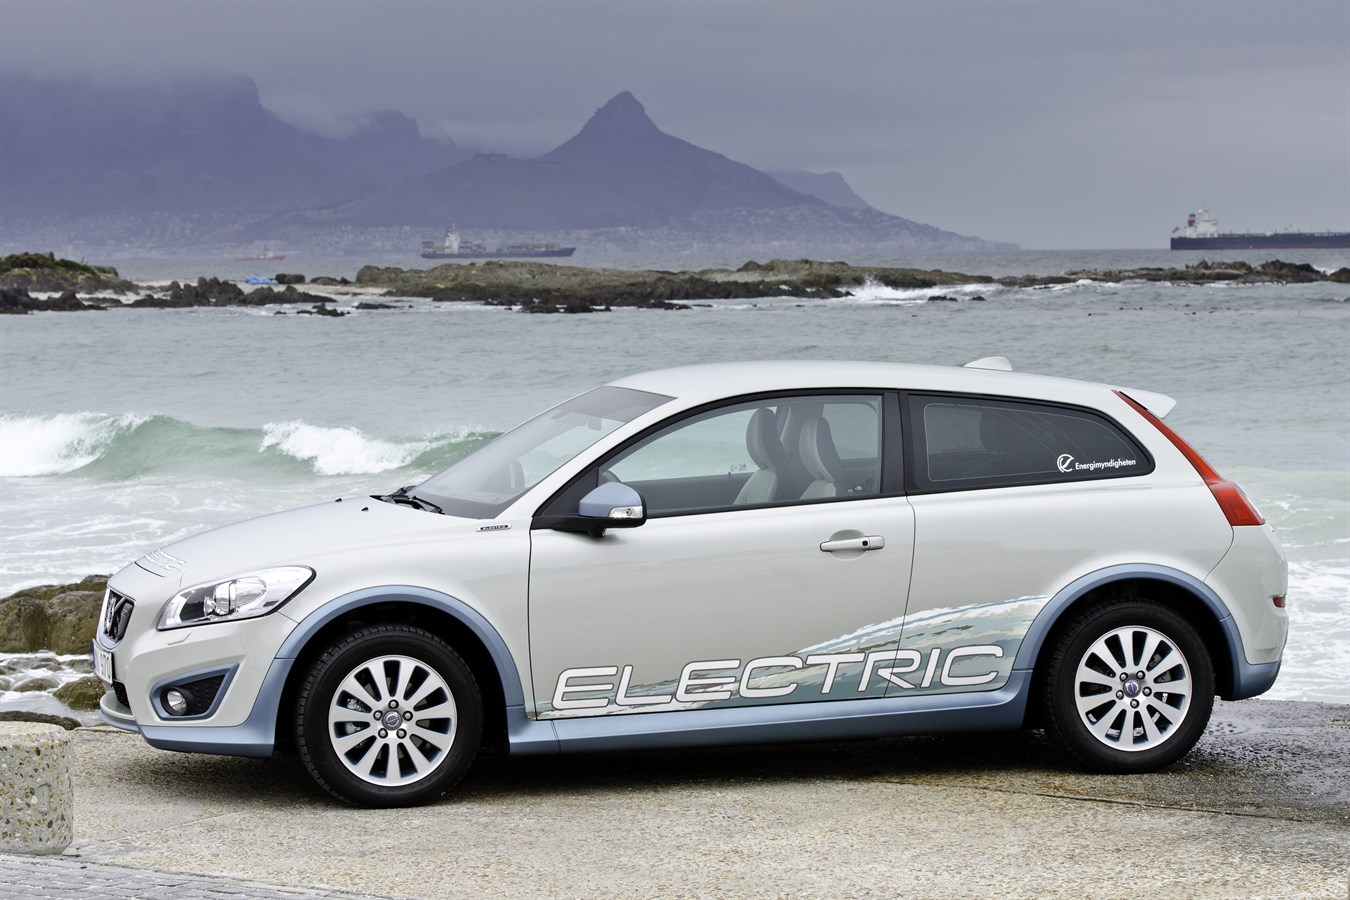 C30 Electric - C30 Electric in Cape Town, South Africa, during Volvo Ocean Race Cape Town stopover